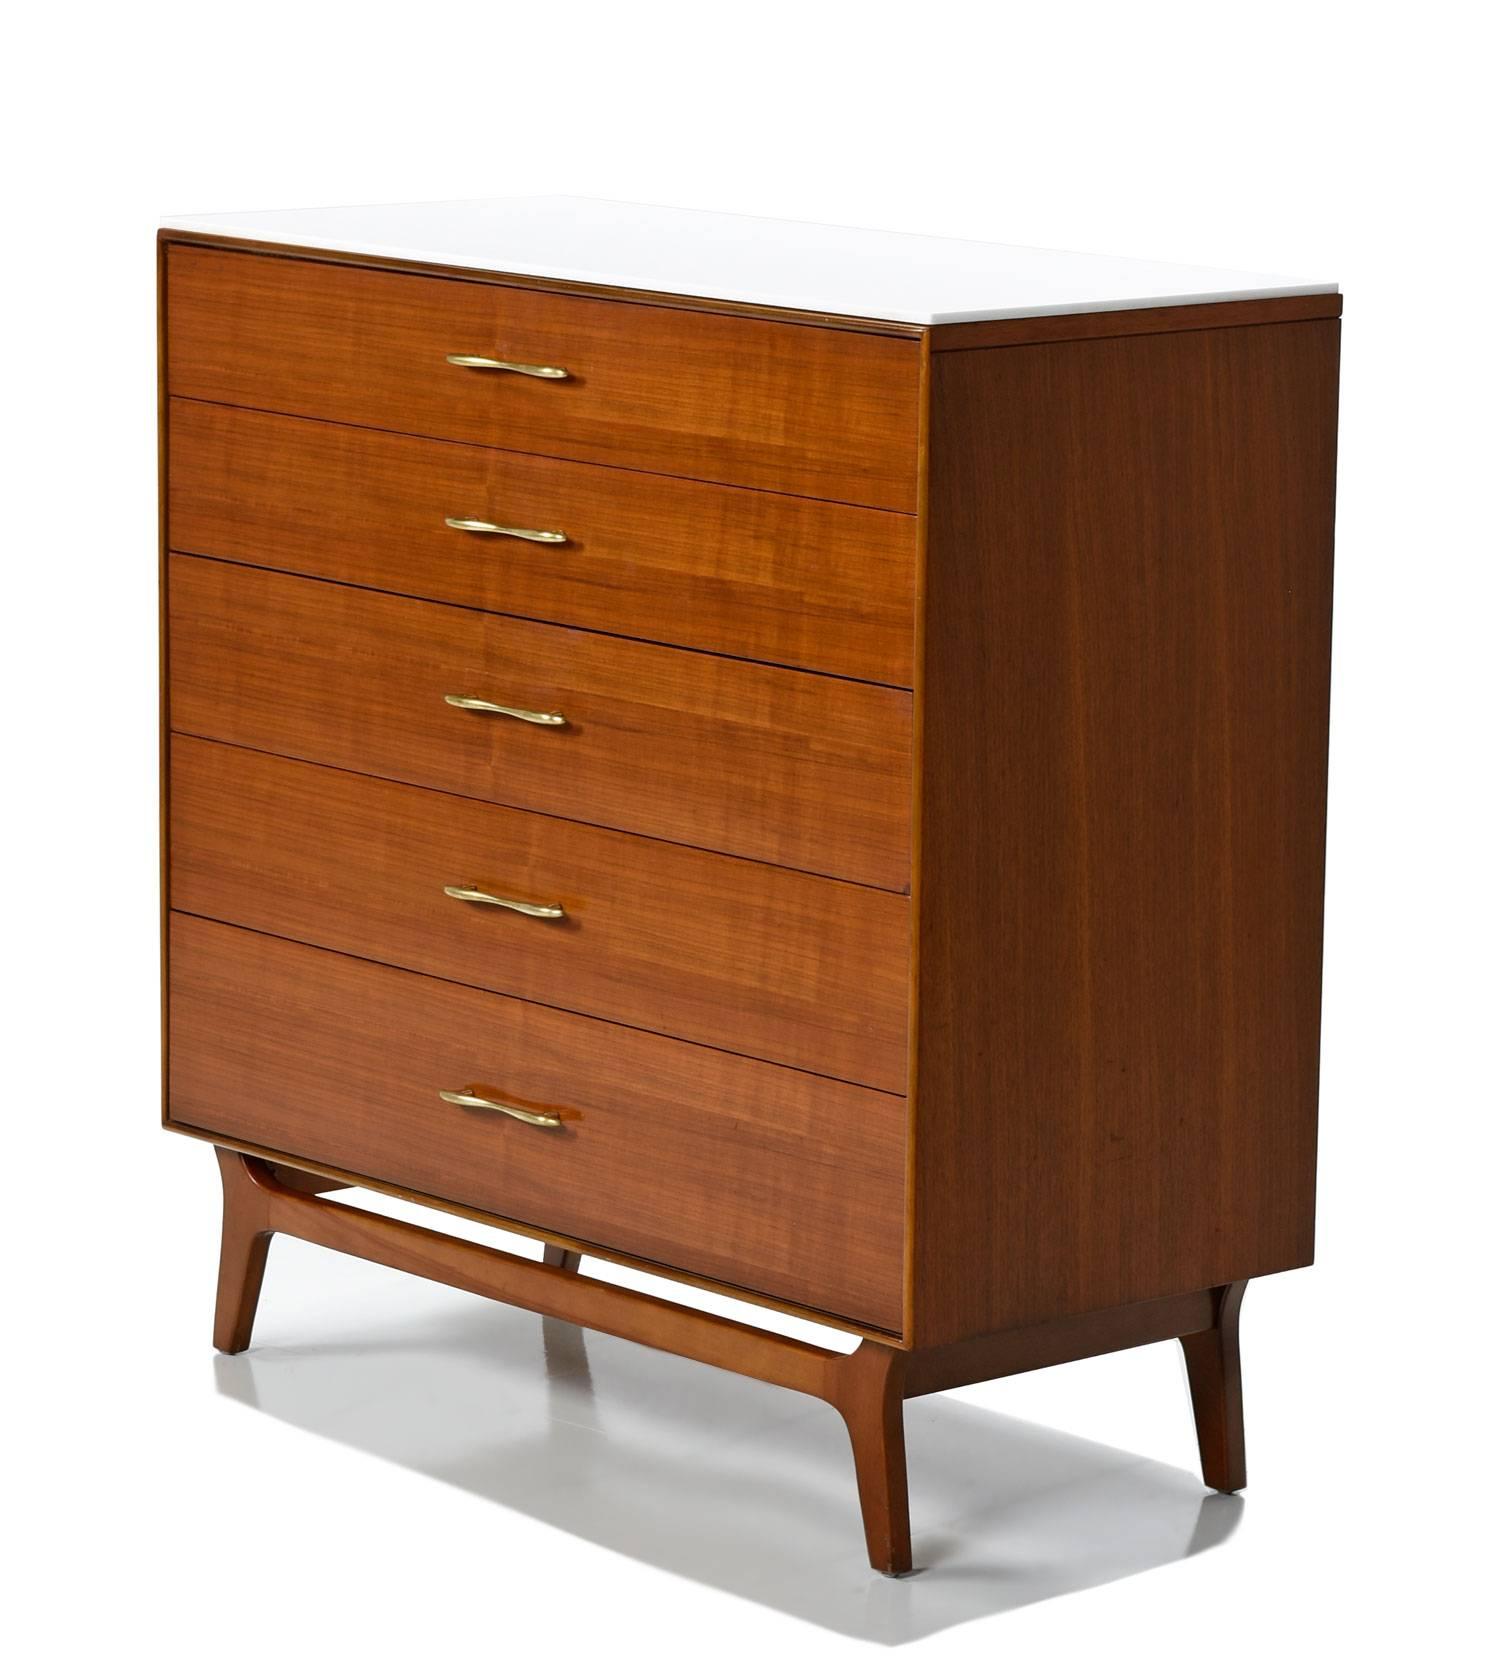 This Mid-Century Modern five-drawer dresser by Rway features expert craftsmanship and spectacular walnut wood. The dresser comes with a piece of polished white stone to accent and protect the top surface. Place perfume bottles, drinks and toiletries